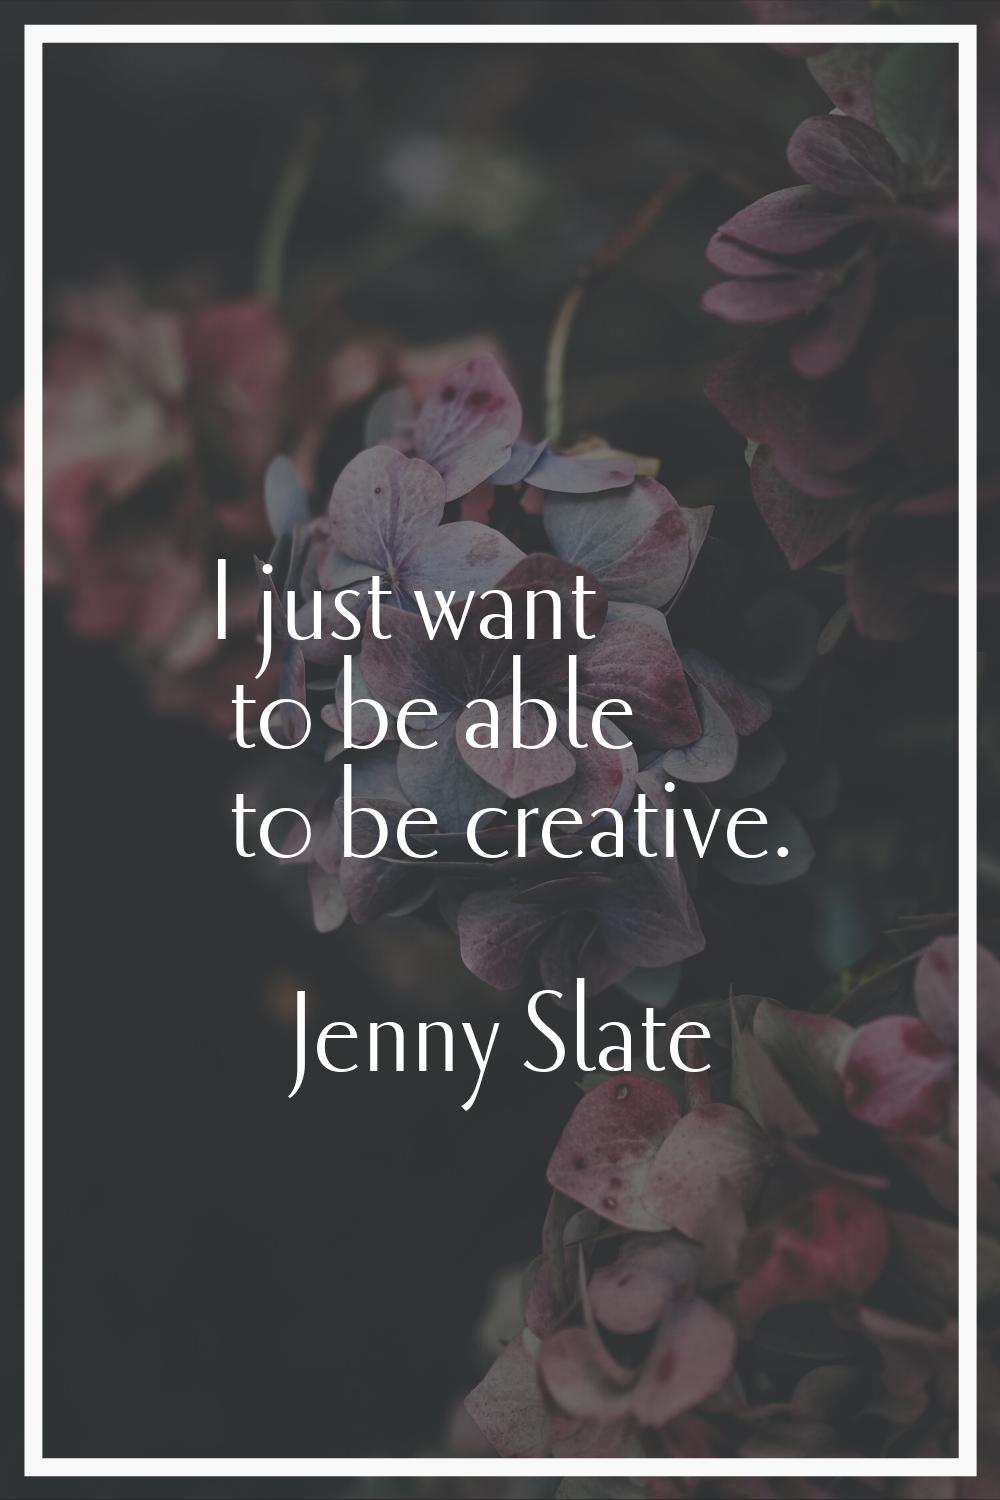 I just want to be able to be creative.